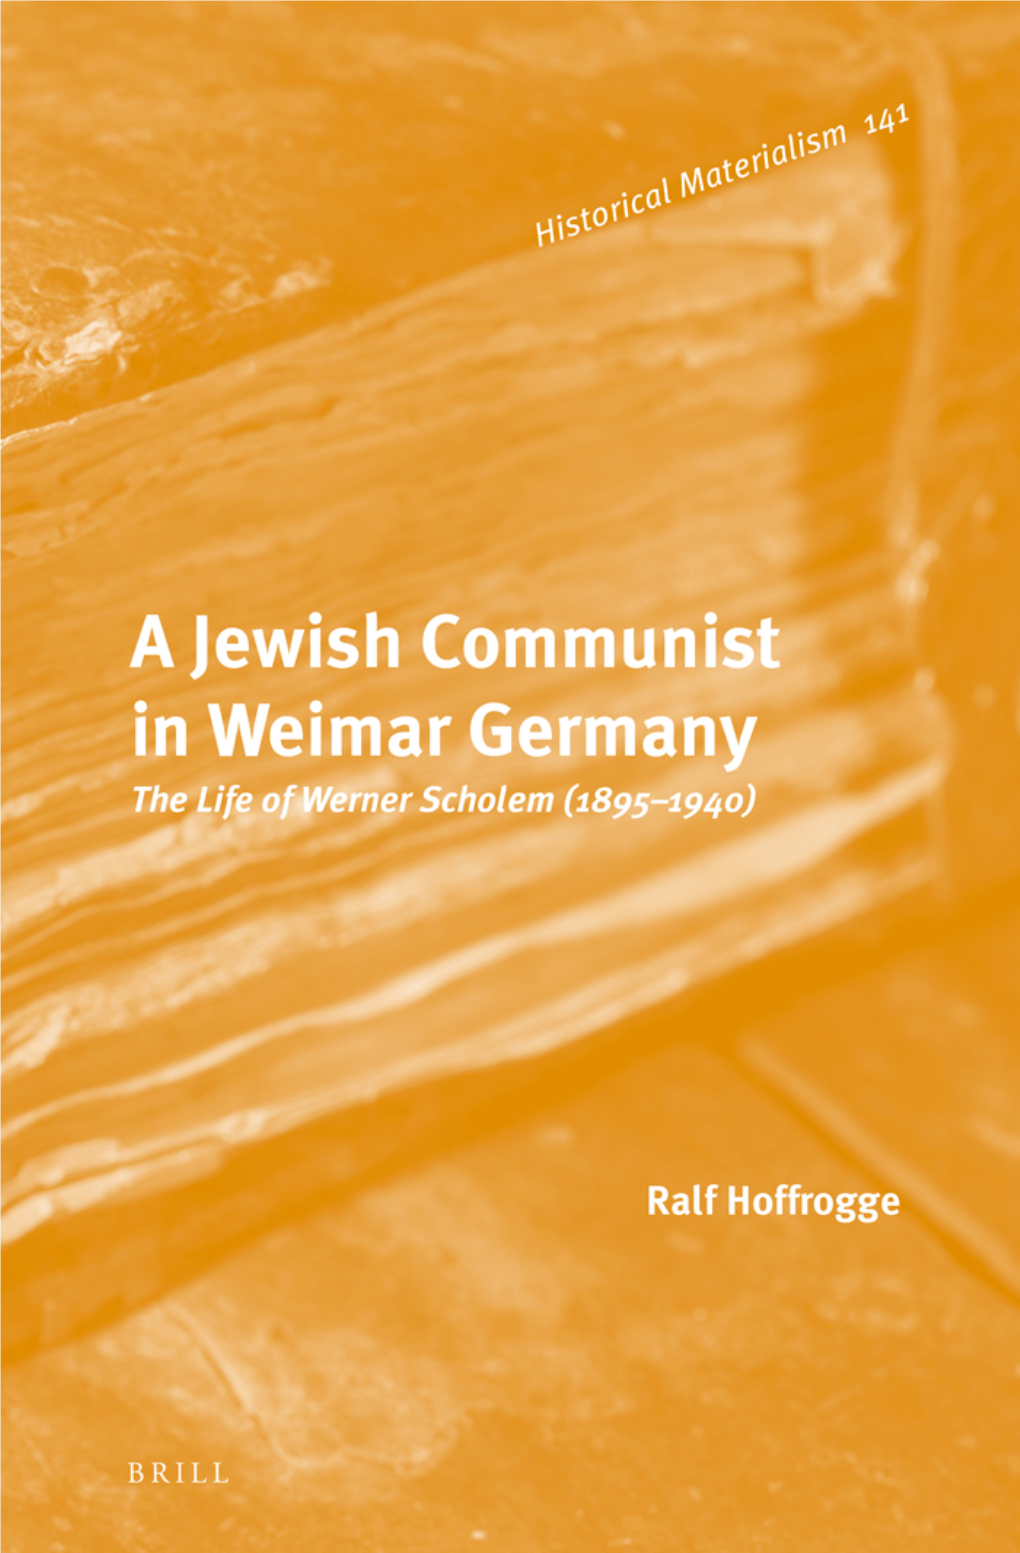 A Jewish Communist in Weimar Germany: the Life of Werner Scholem